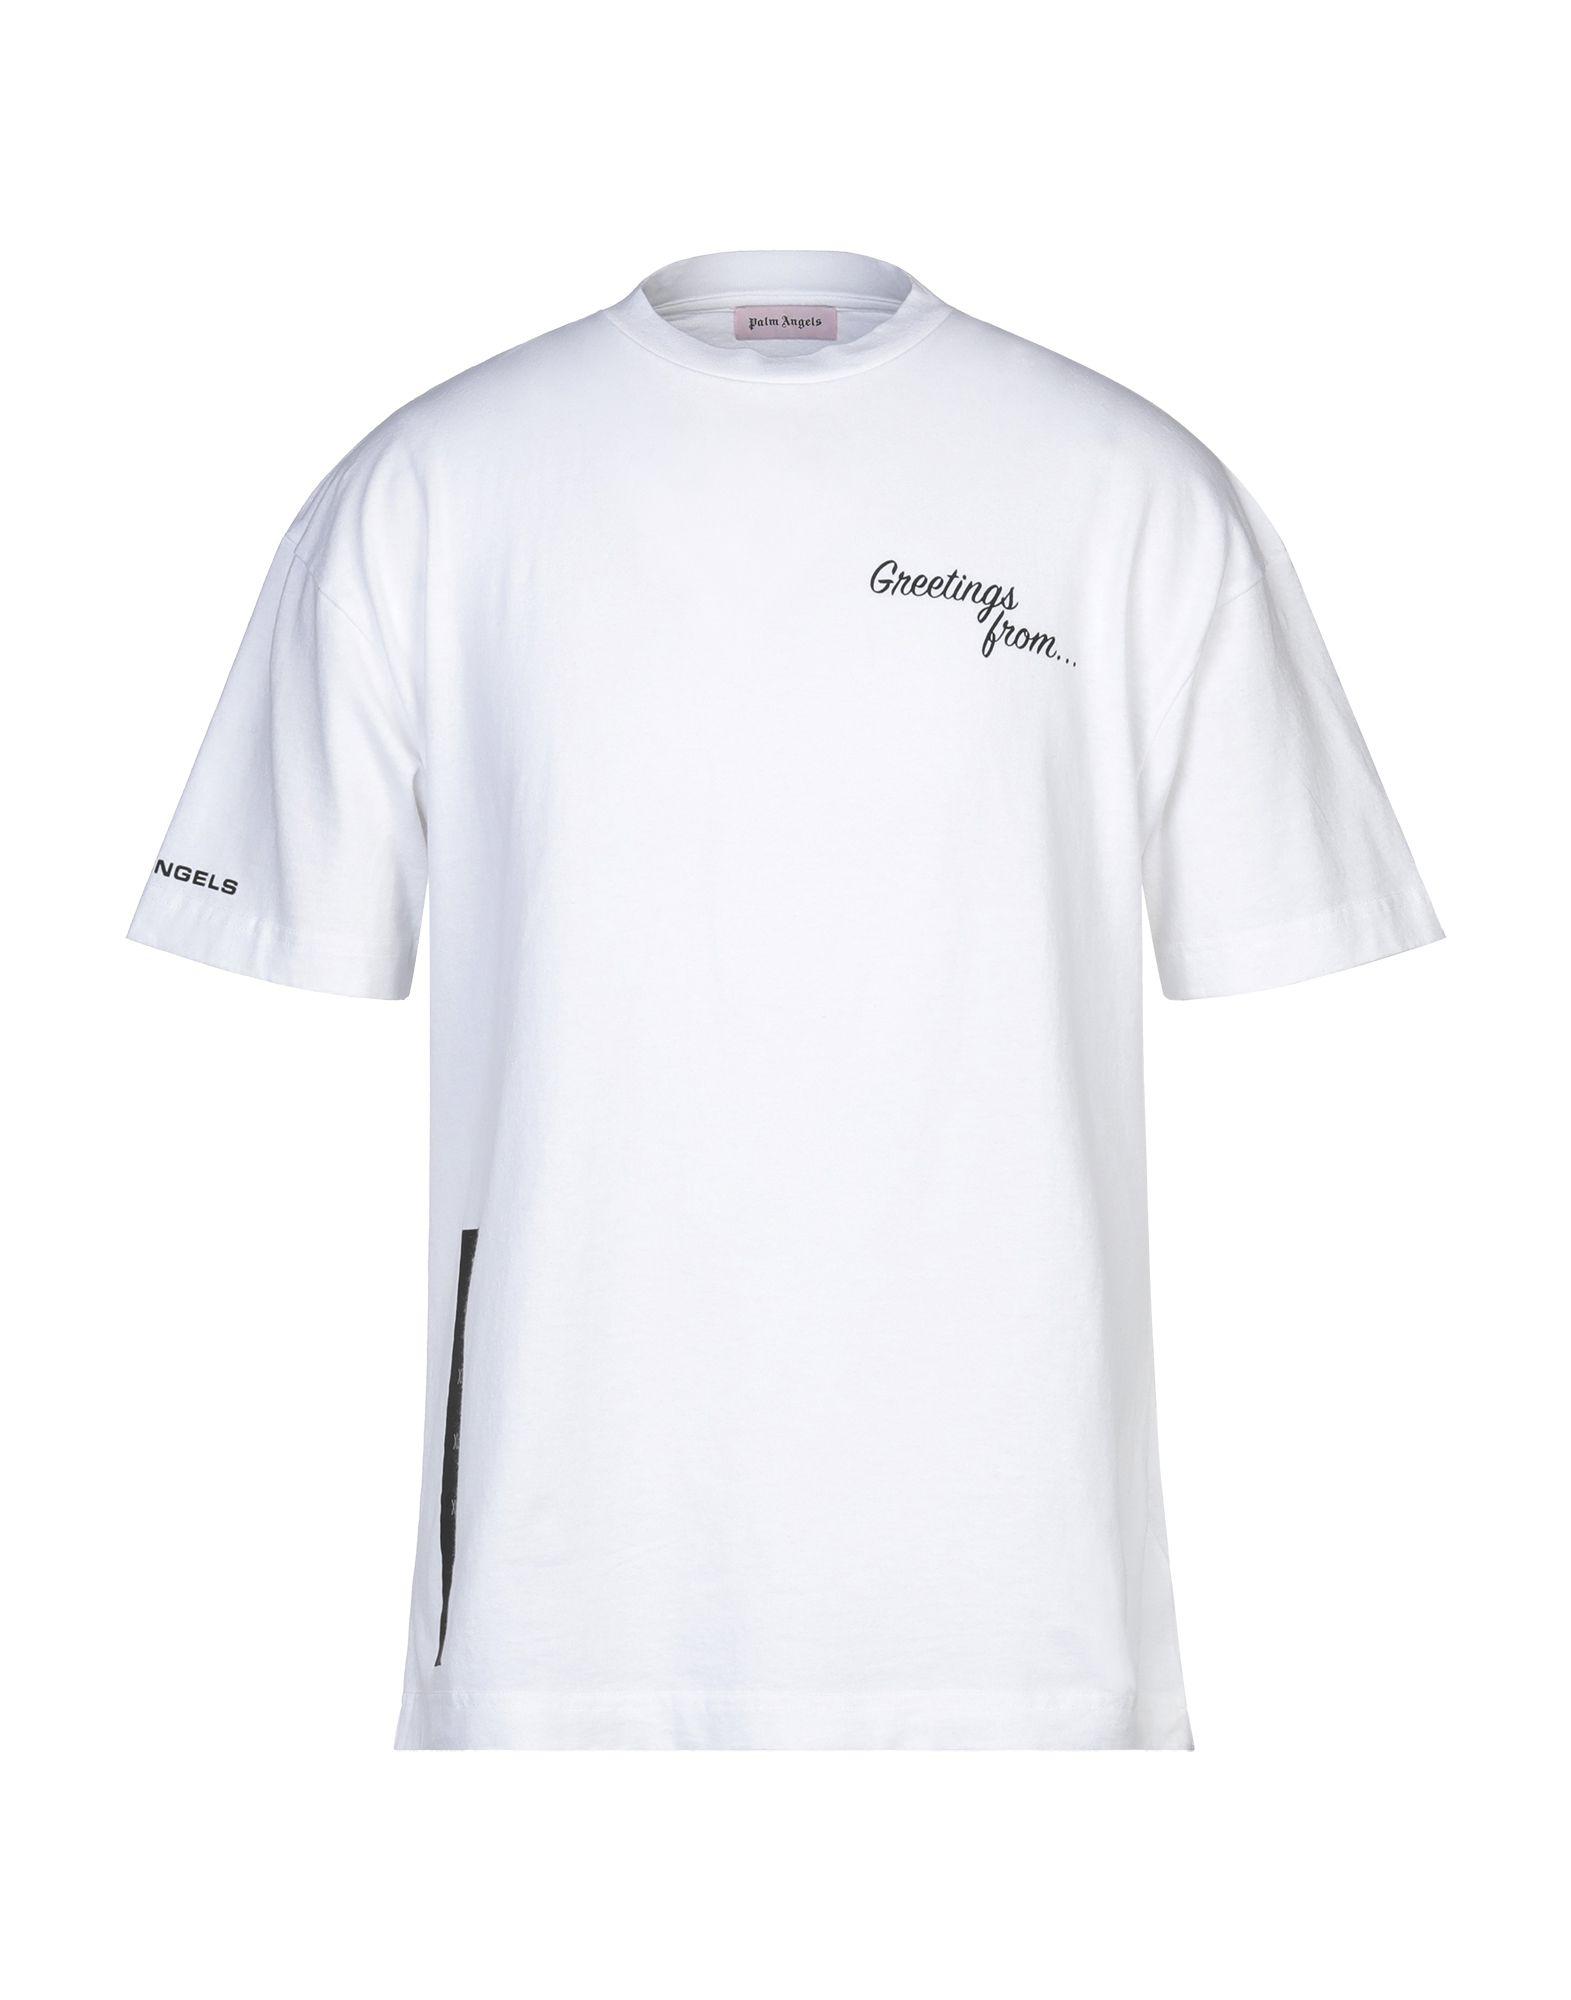 Palm Angels T-shirt in White for Men - Lyst